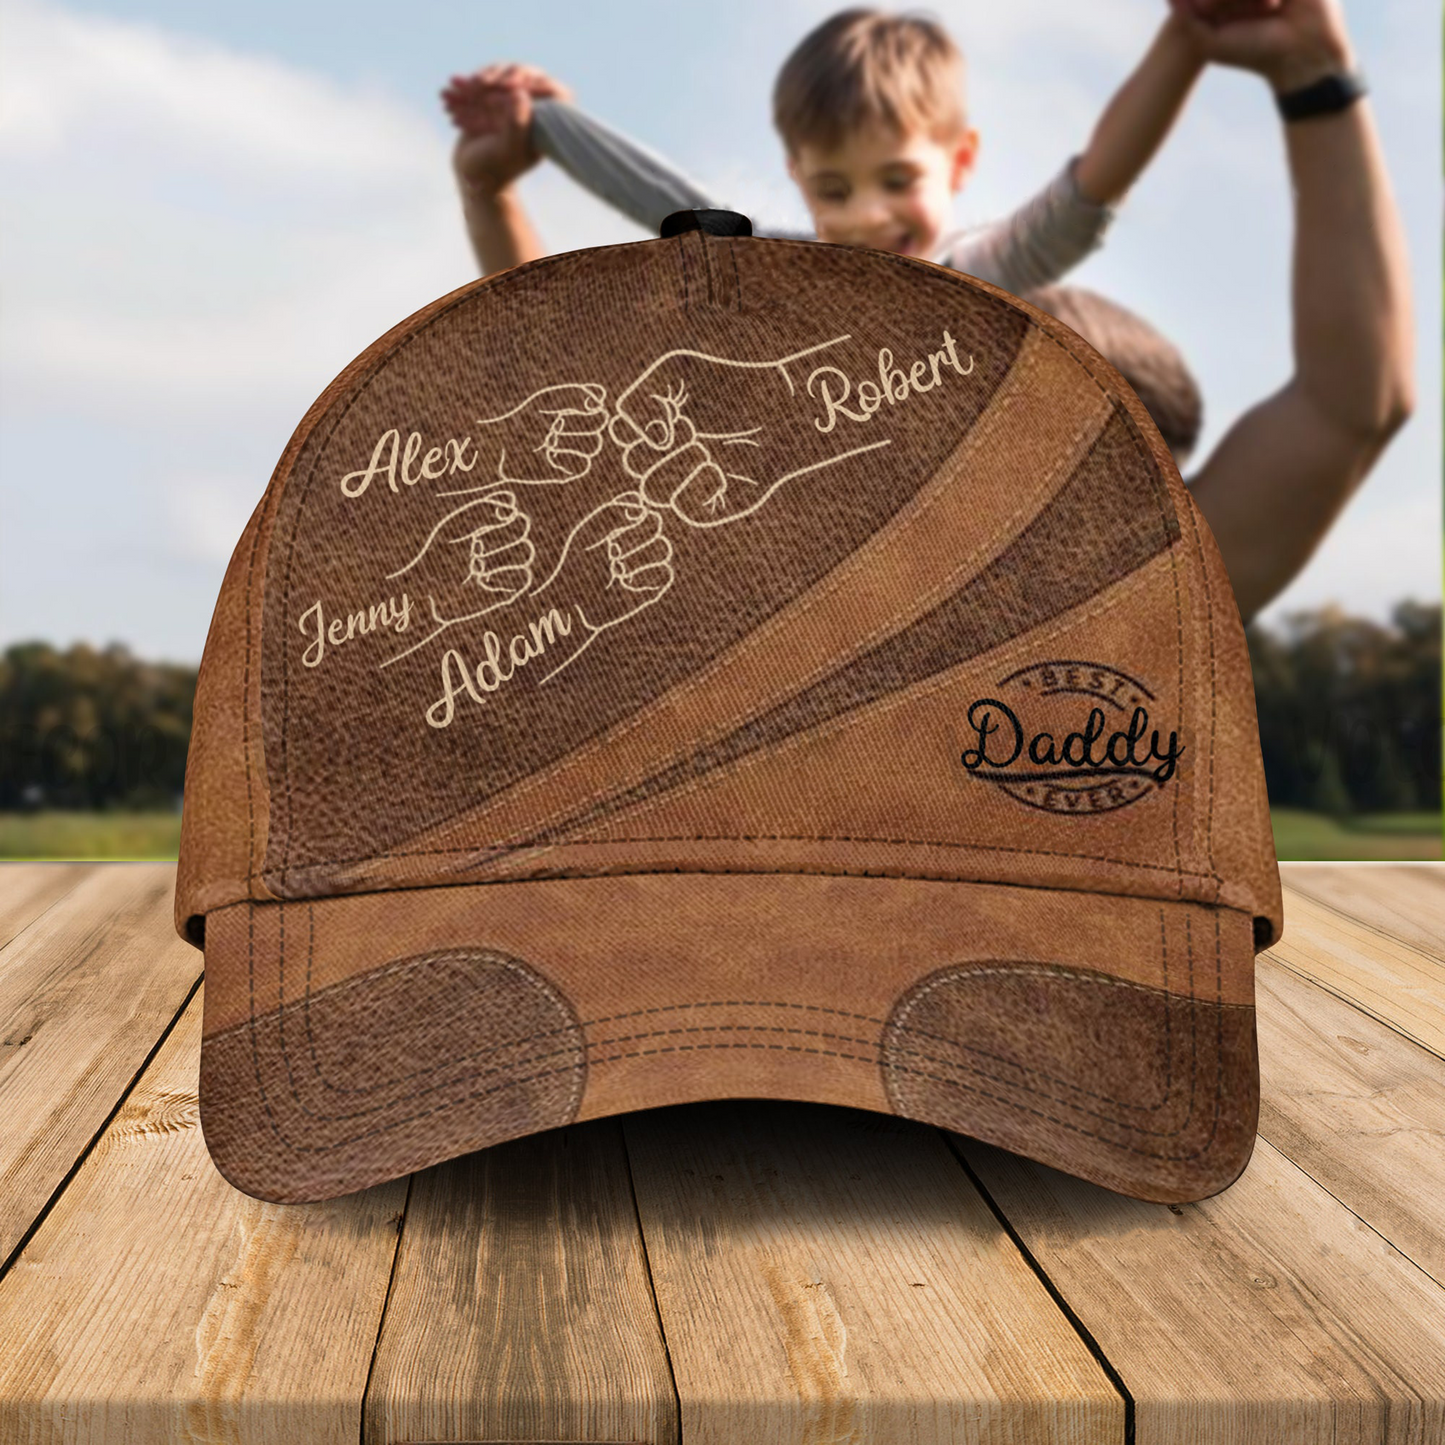 Best Dad Ever - Personalized Cap with Kid Names